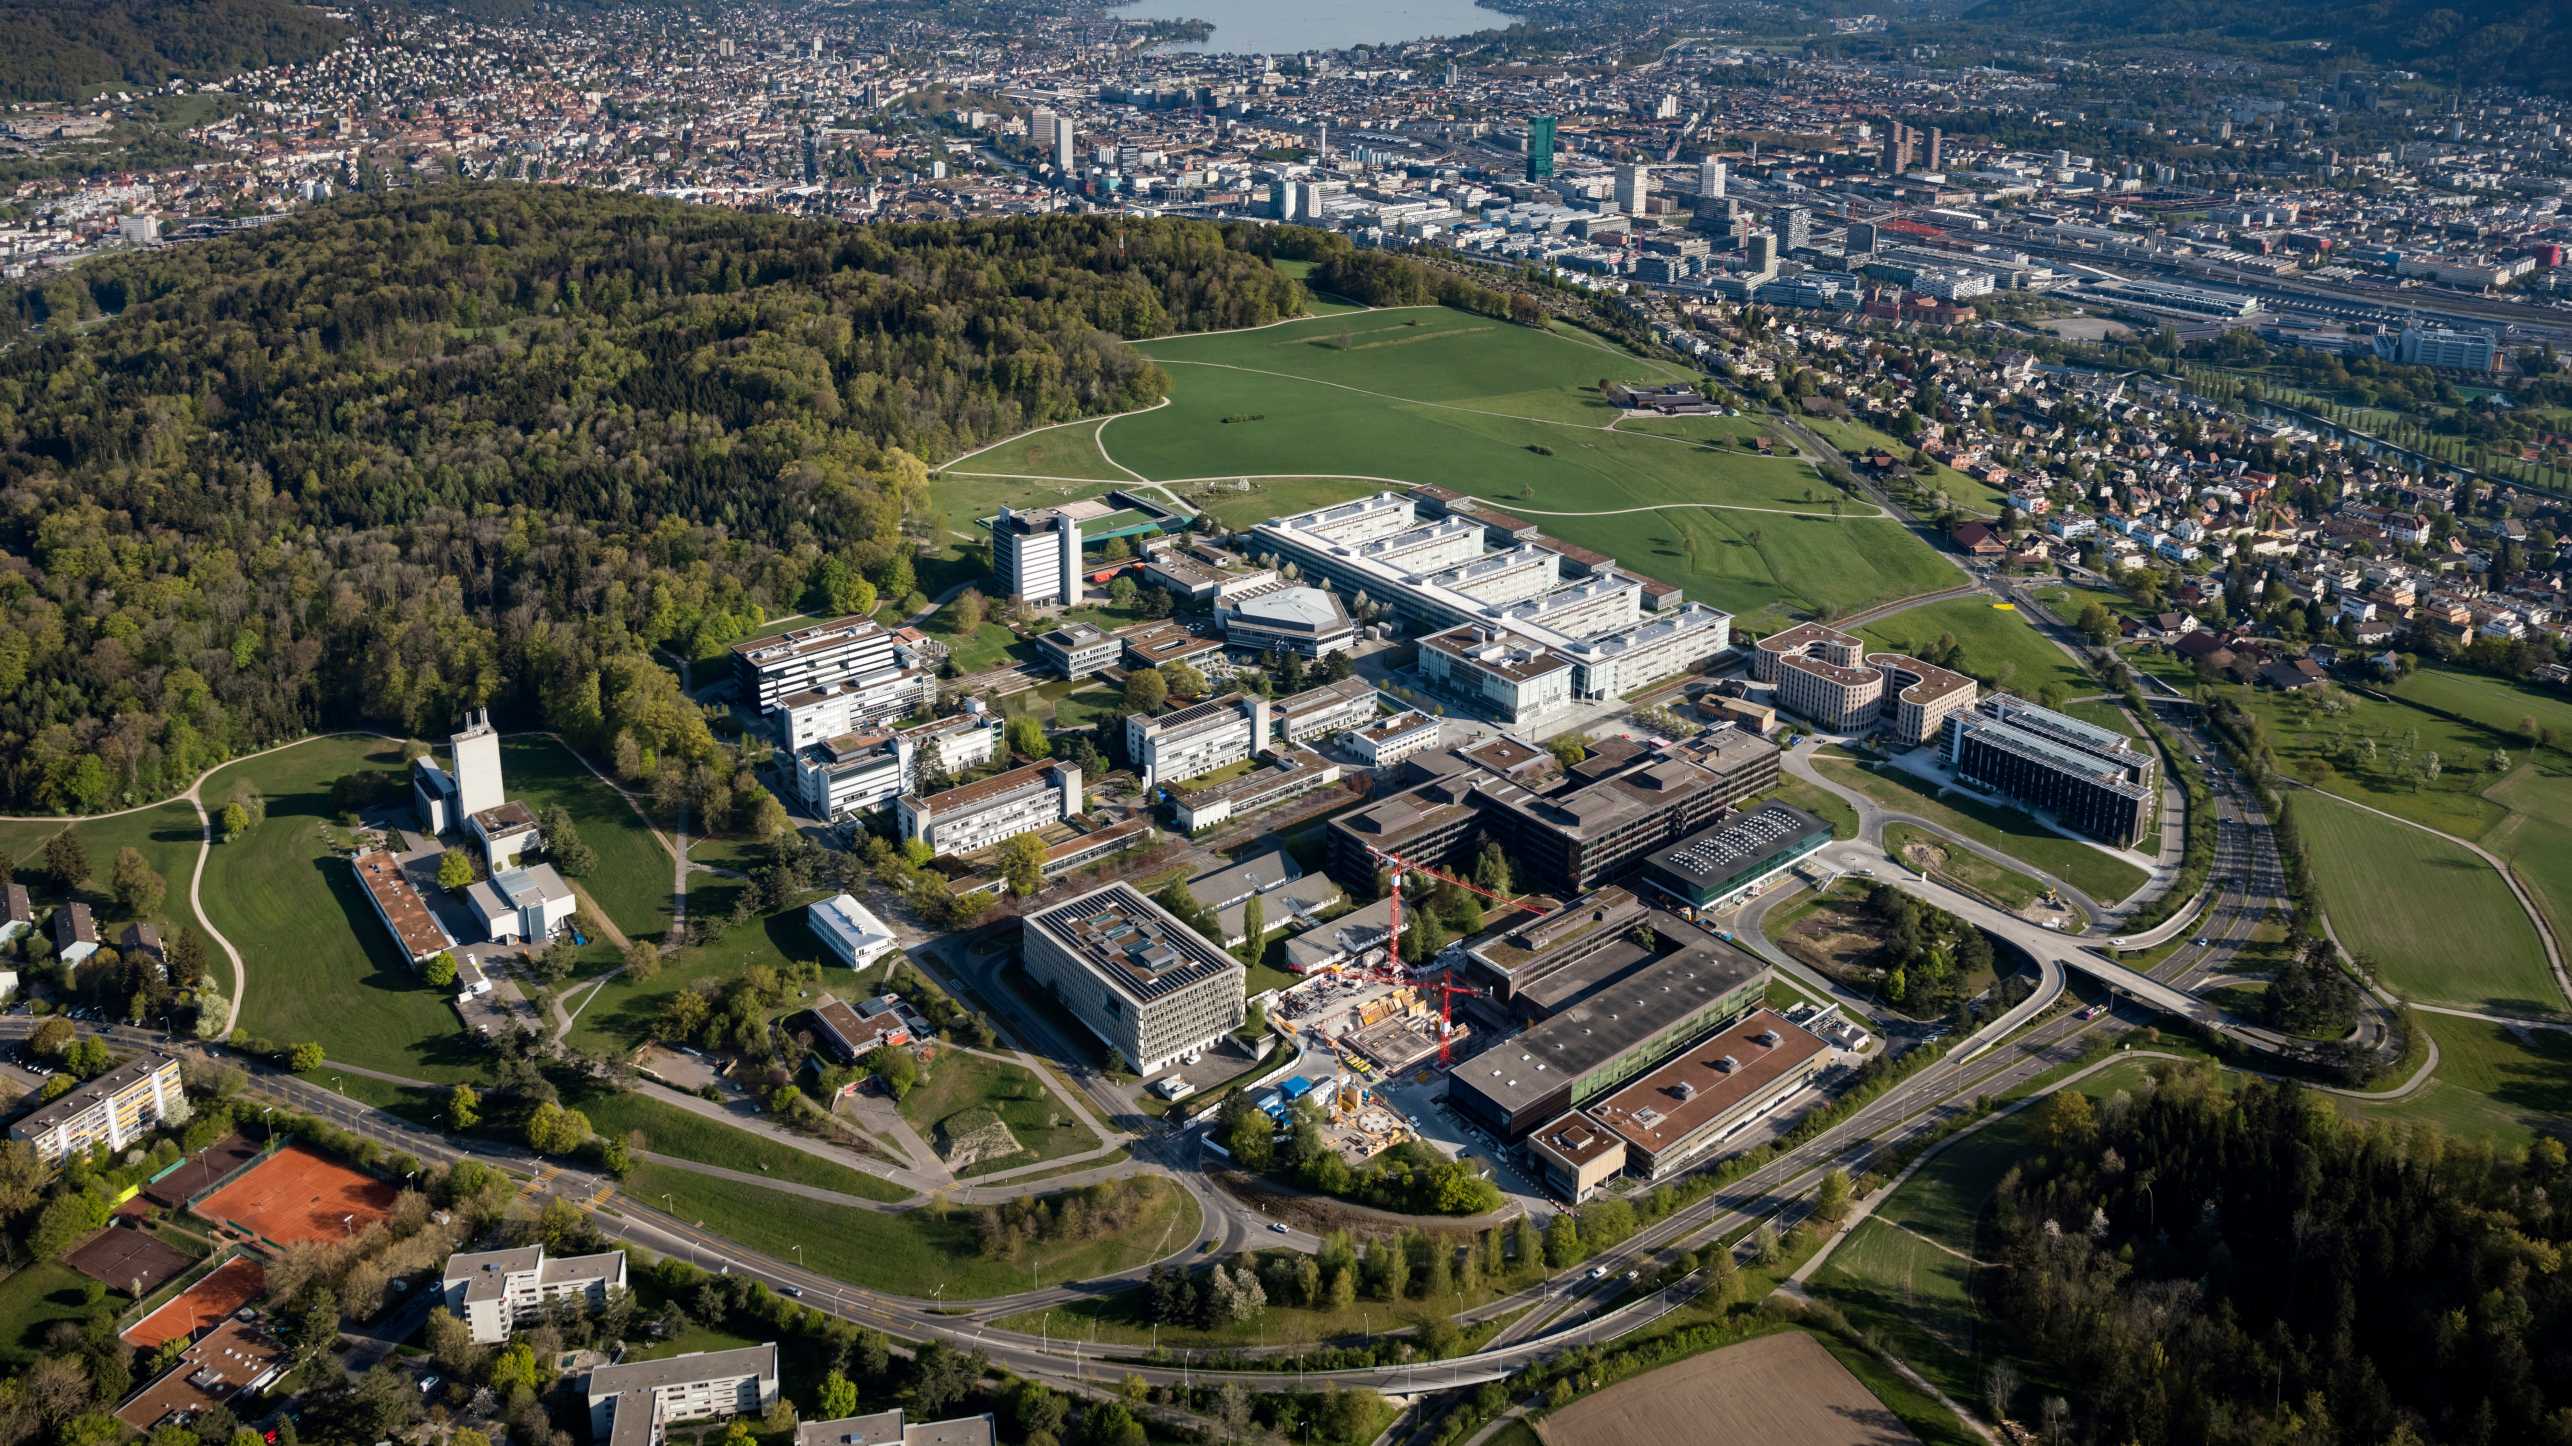 The Hönggerberg campus is undergoing further development on the basis of the Masterplan 2040. Image: Alessandro Della Bella